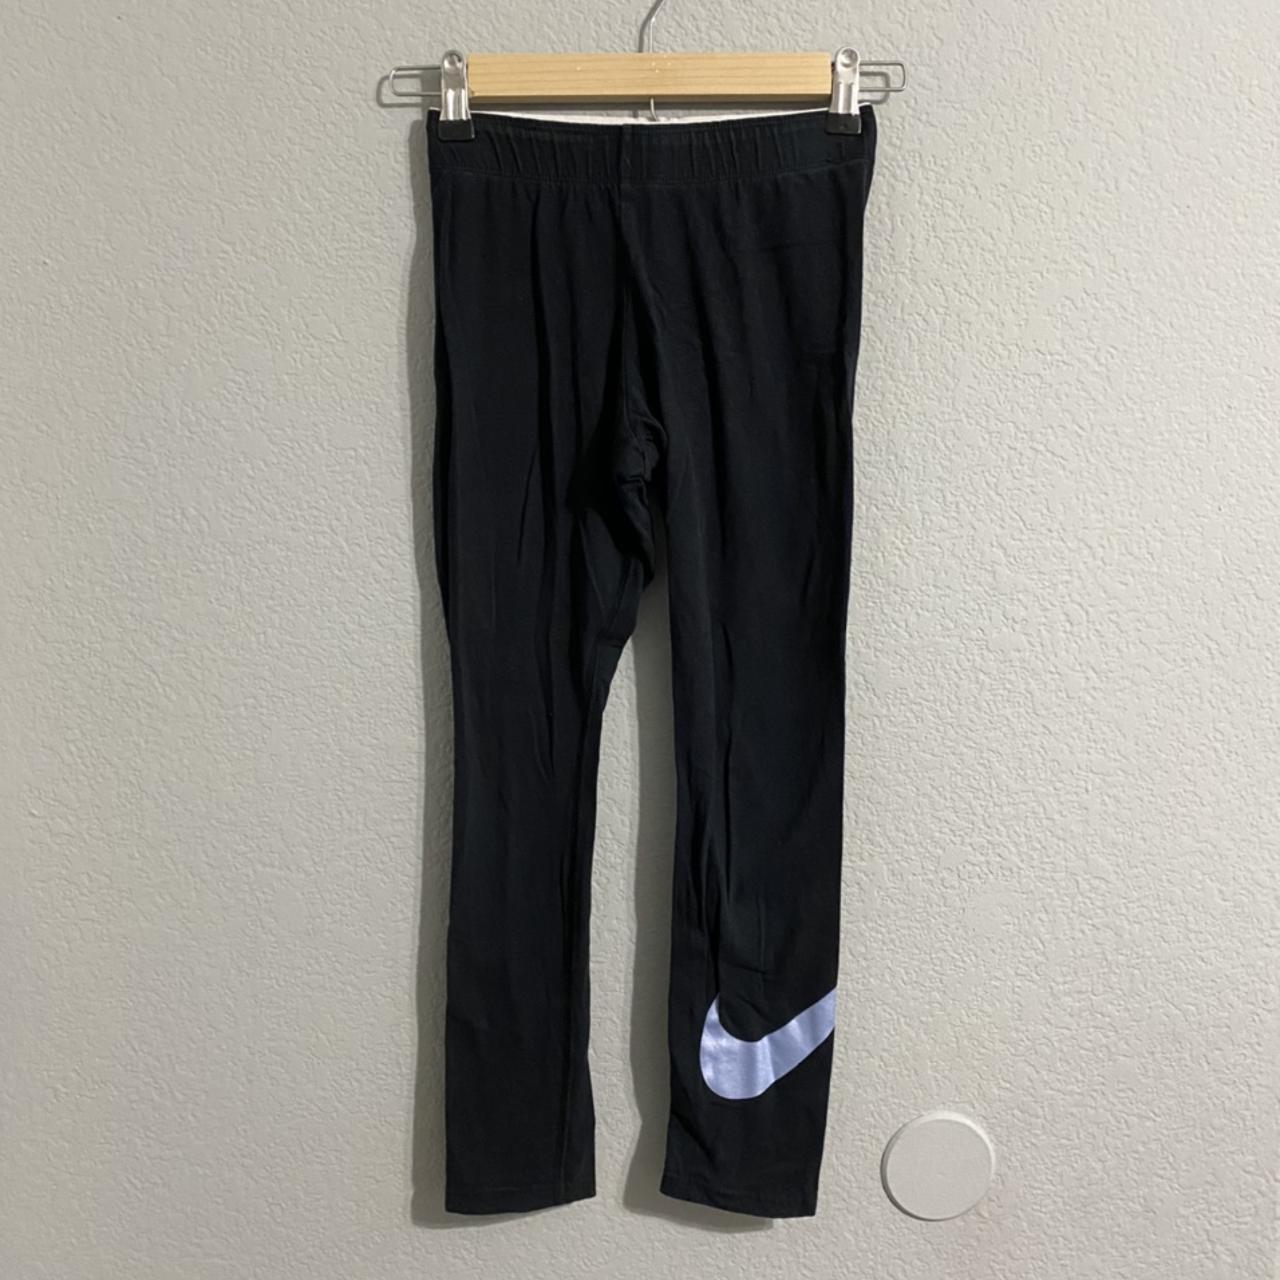 nike leggings with shiny blue detail most accurate - Depop